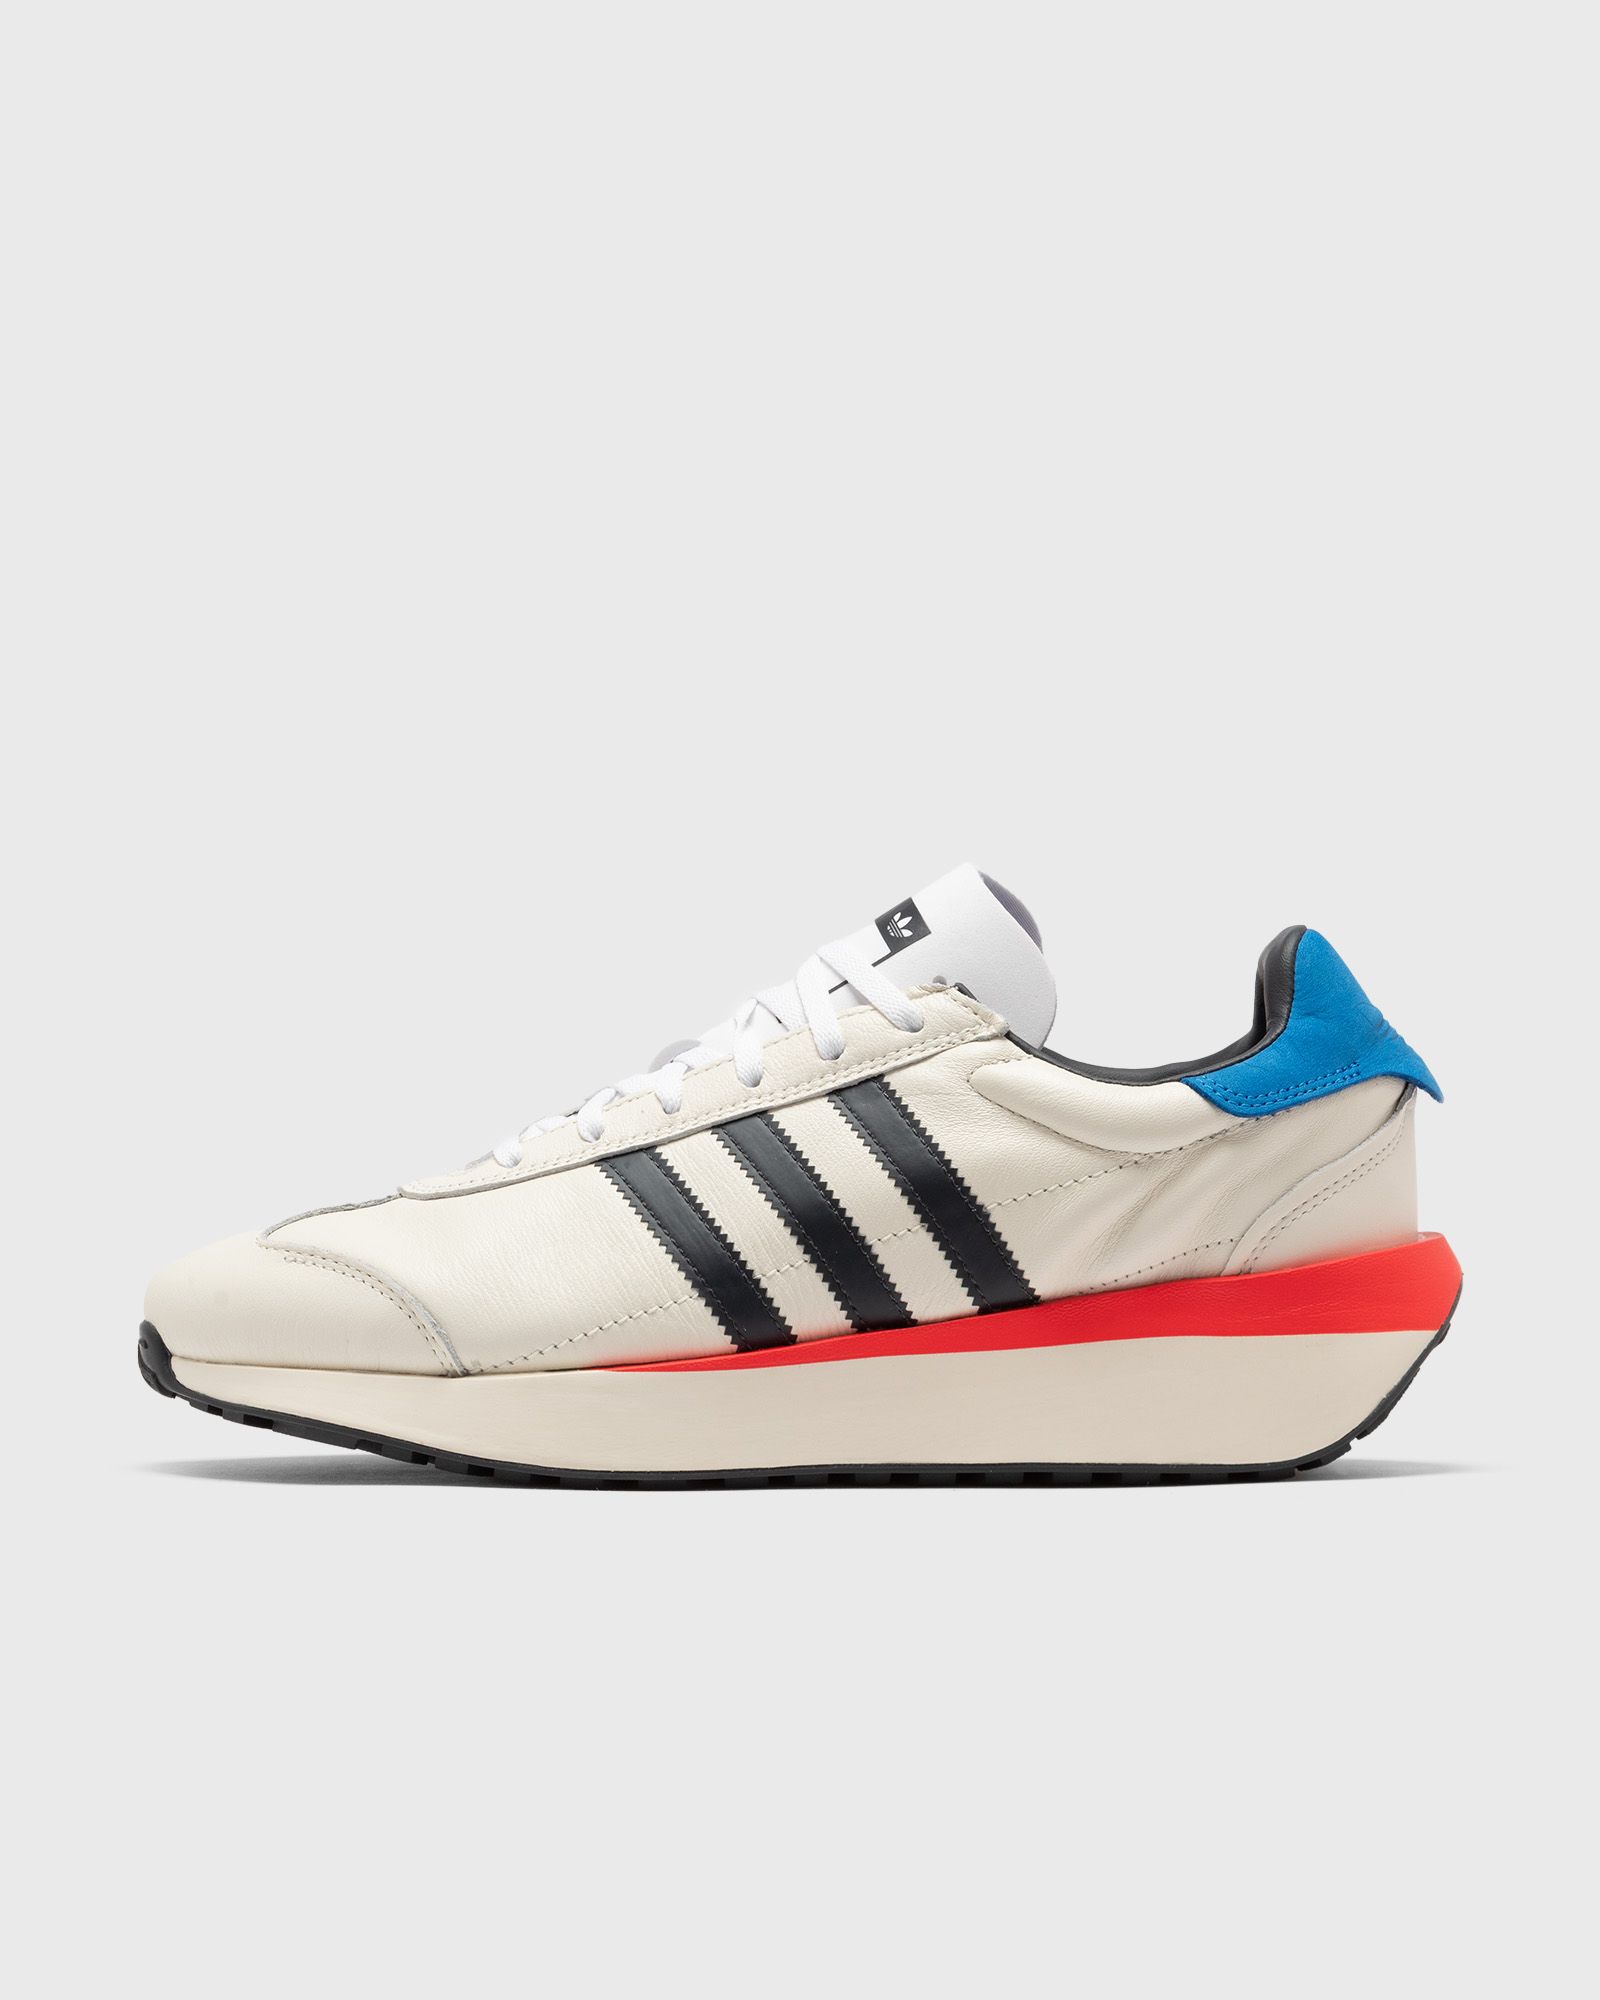 Adidas - country xlg men lowtop black|white in größe:43 1/3